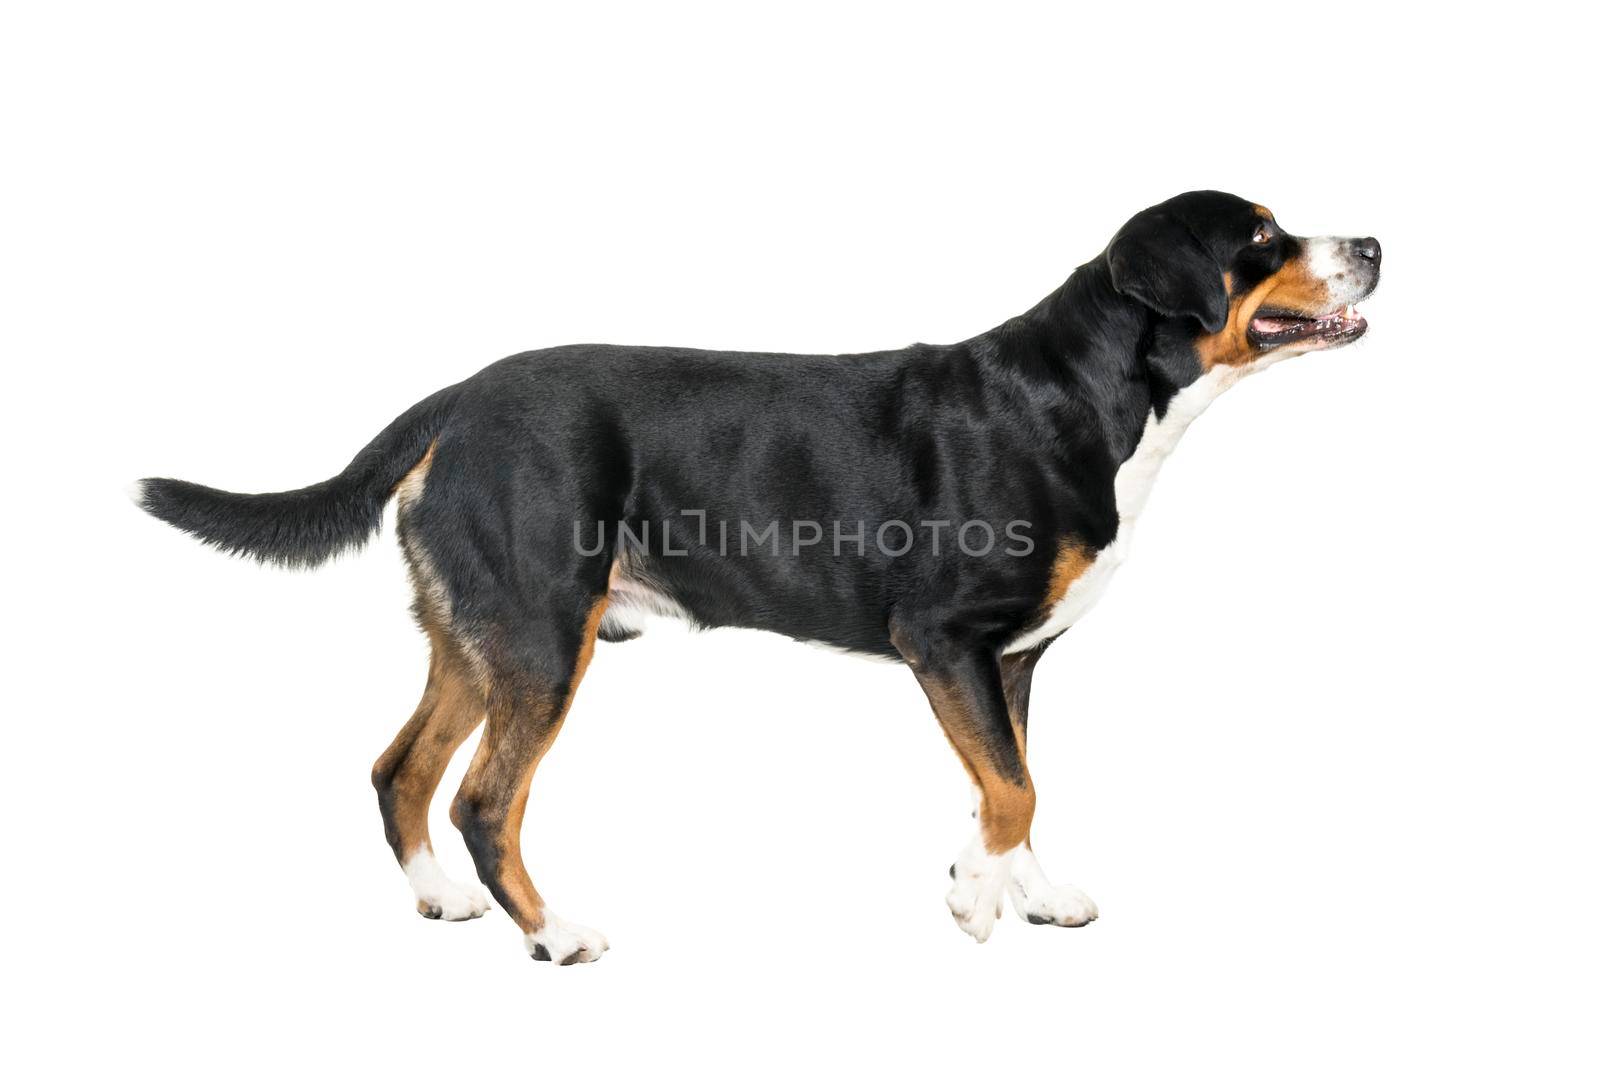 A Greater Swiss Mountain Dog standing and looking away from the camera